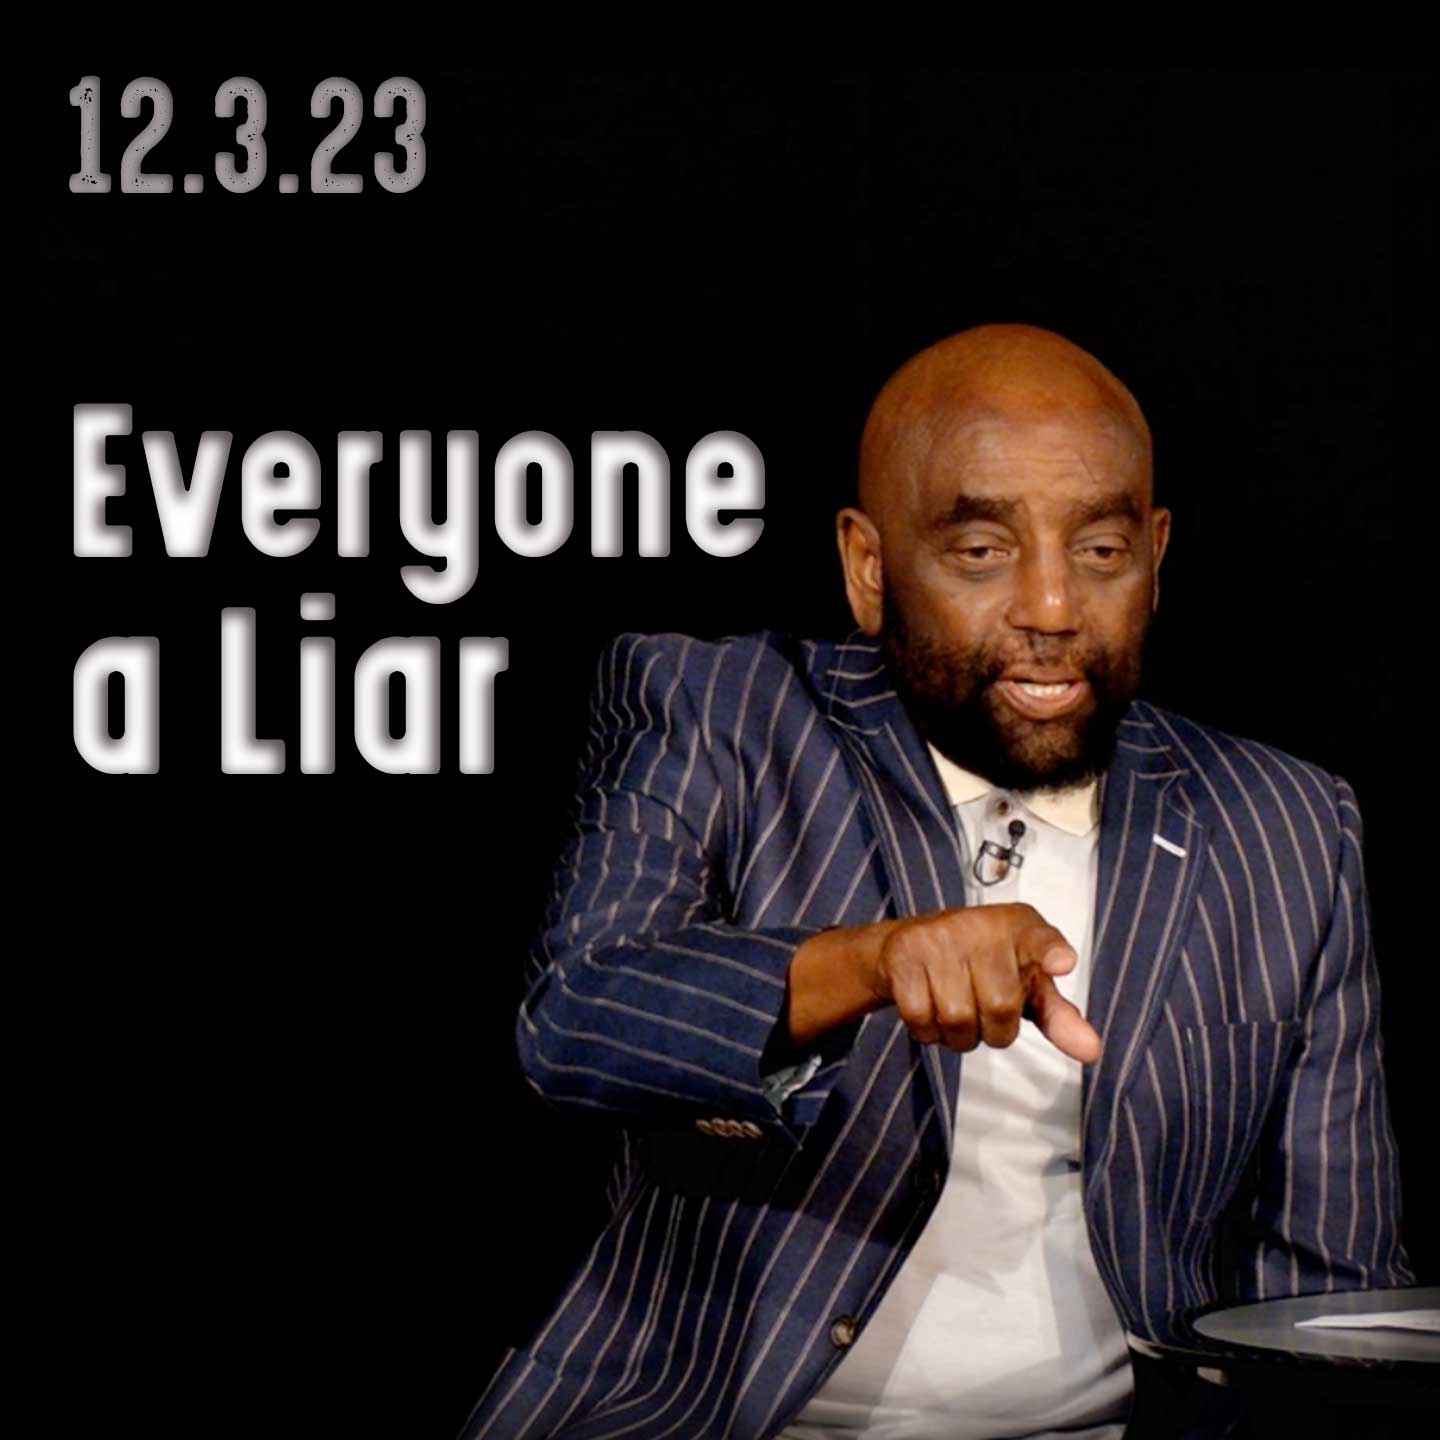 What distinguishes you from other people? Church 12/3/23 – Everyone is a liar